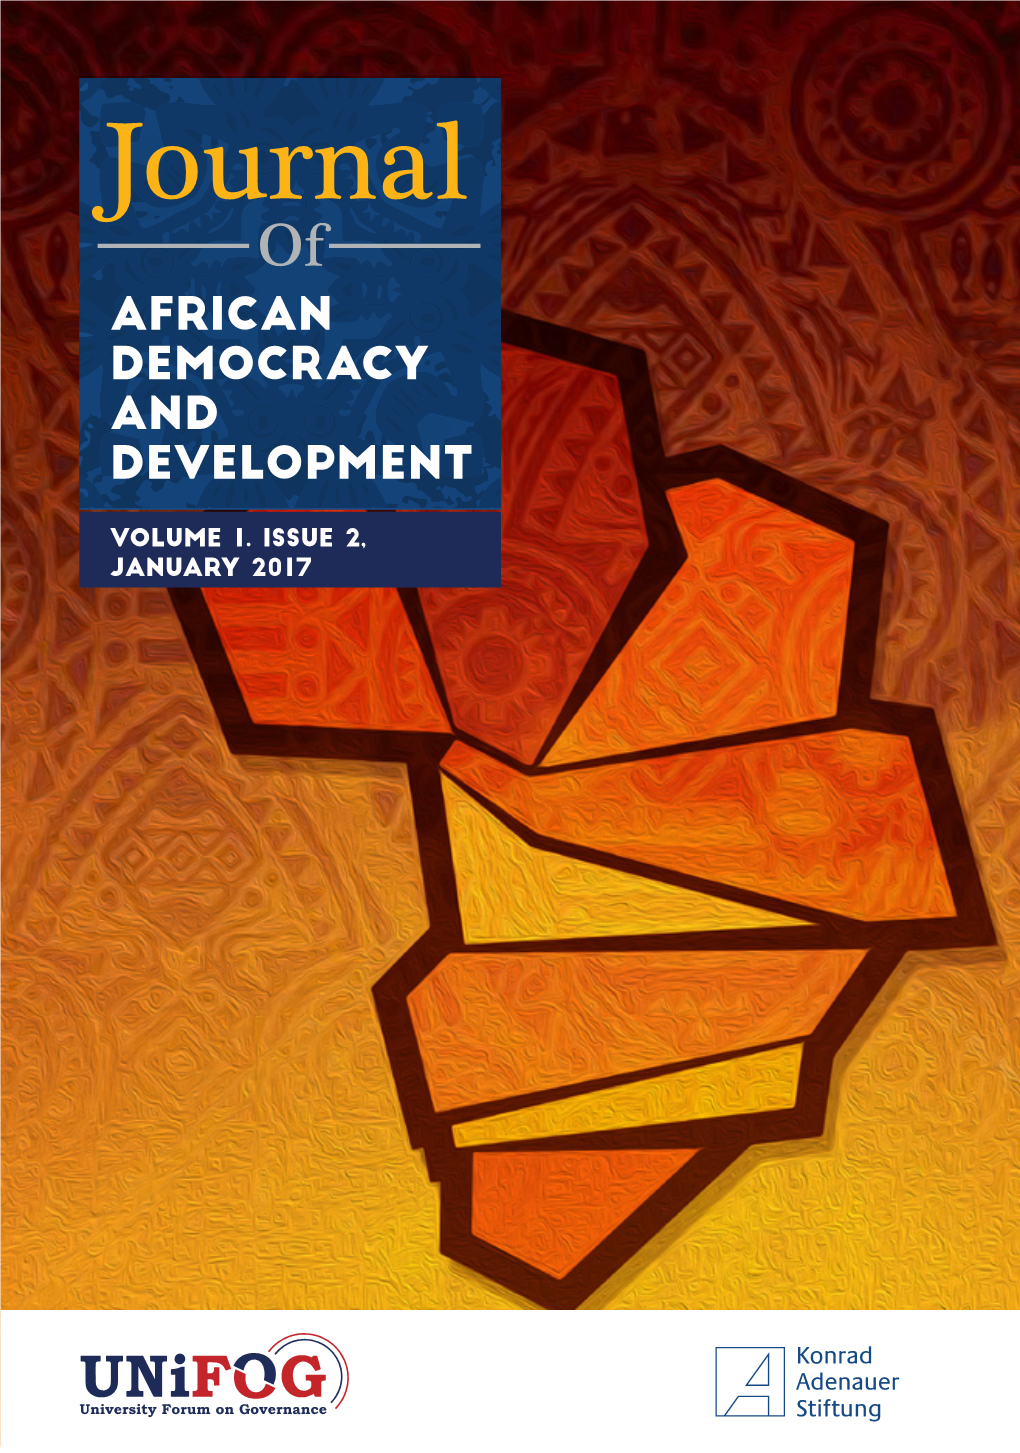 Journal on African Democracy and Development Volume 1, Issue 2, January 2017